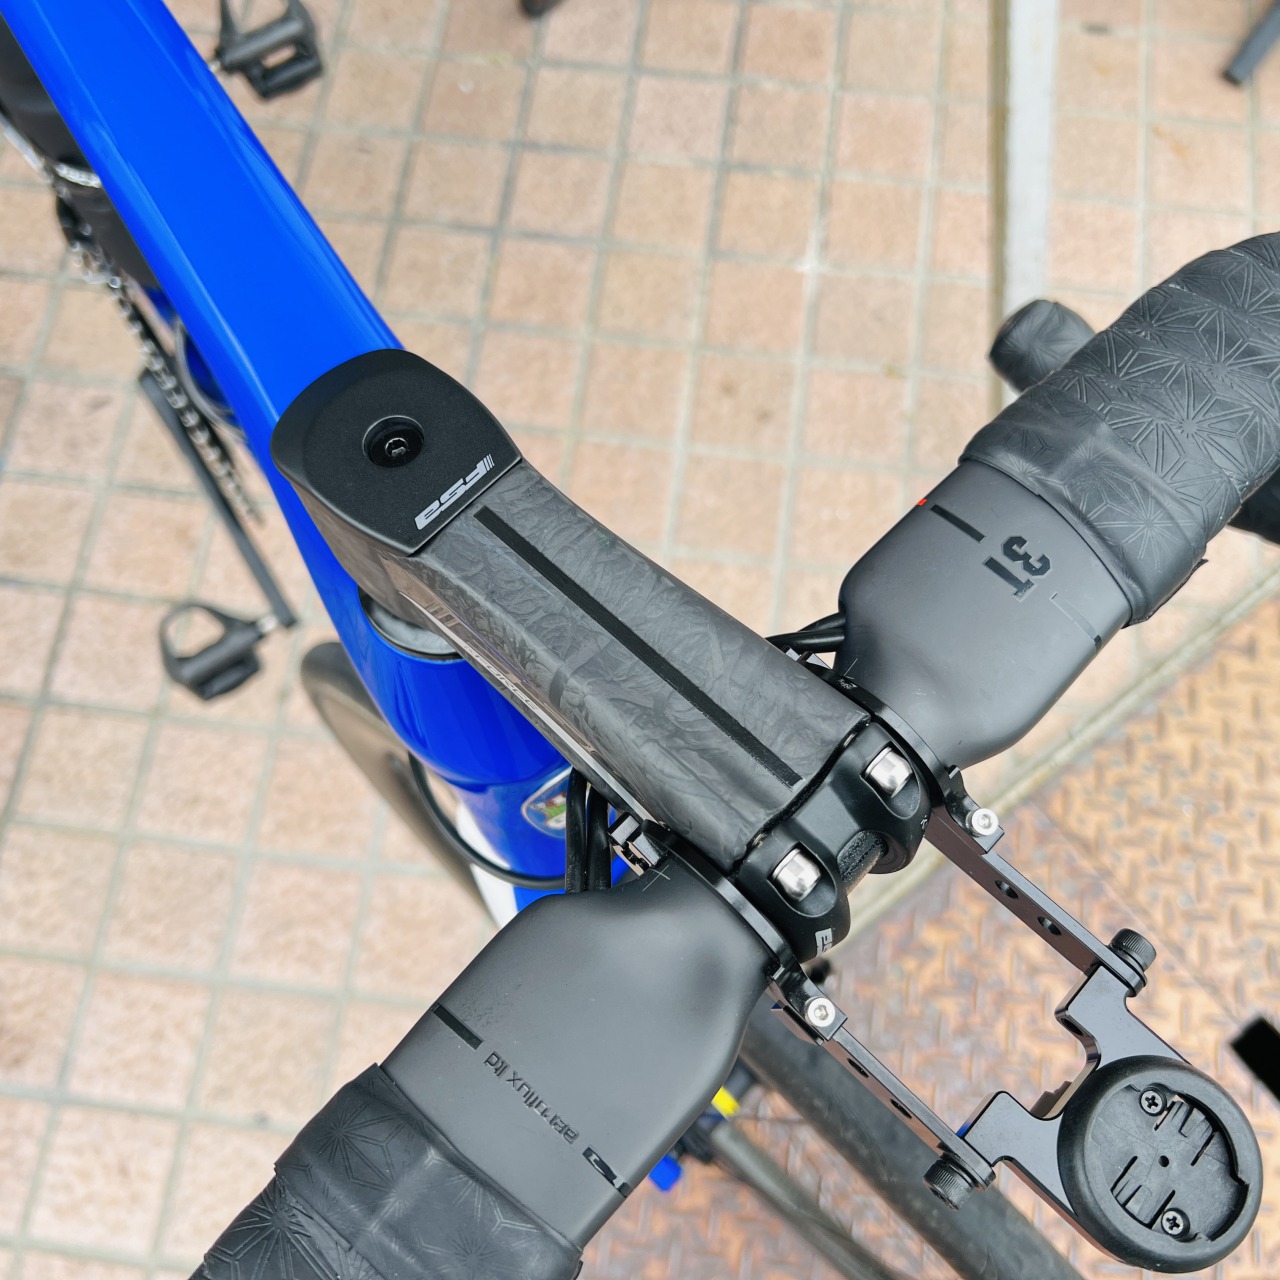 FSA K-FORCE LIGHT カーボンステム取り付けしました！！ - Climb cycle 